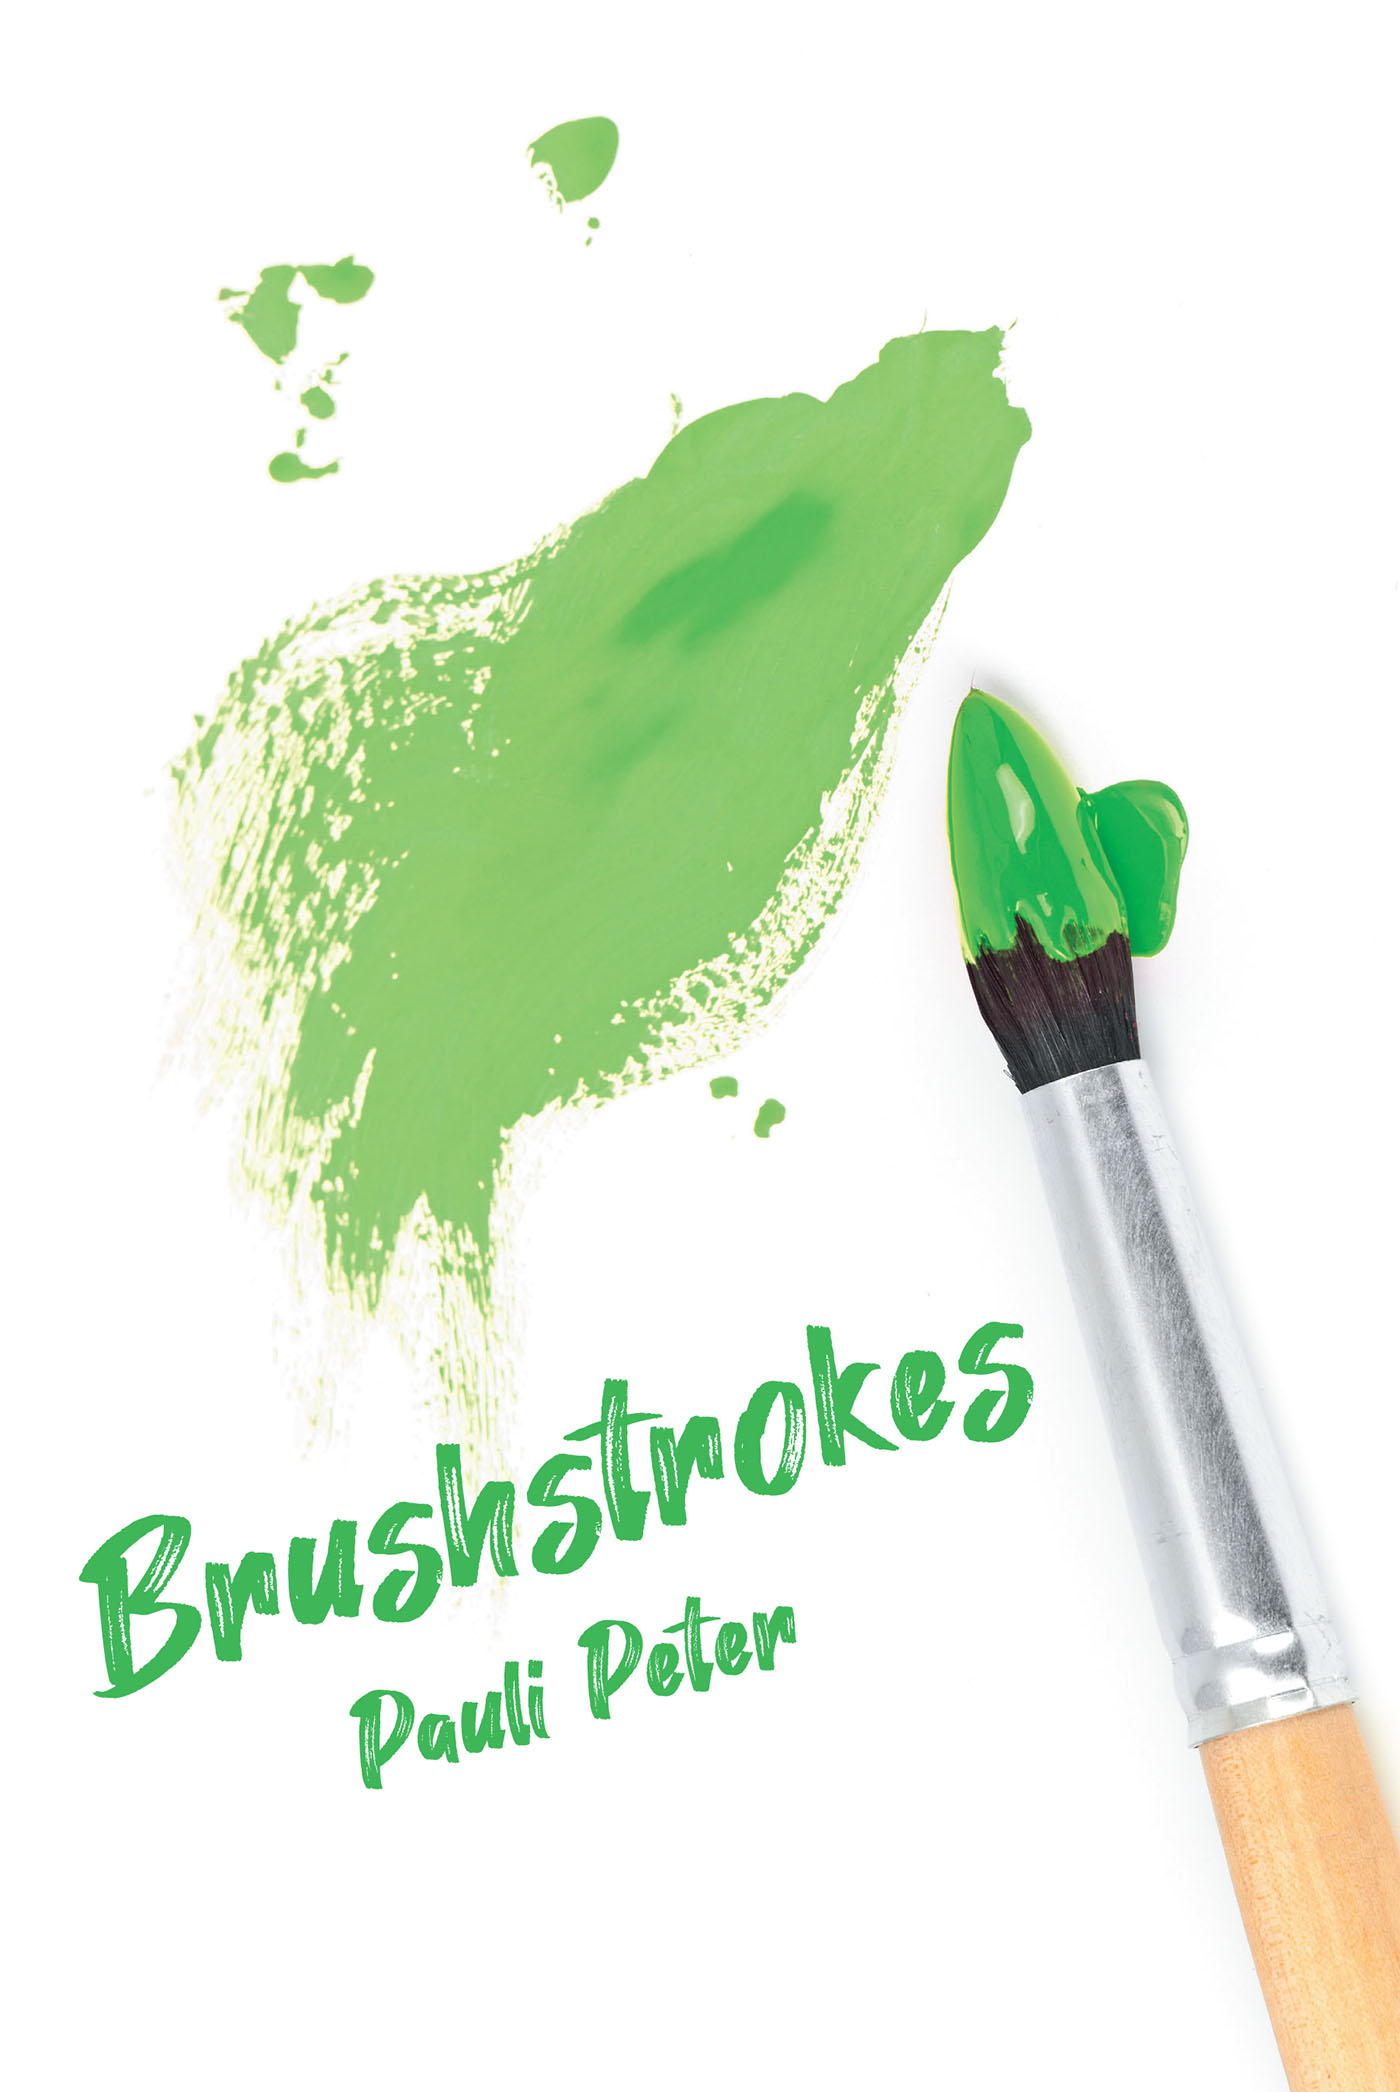 Author Pauli Peter’s New Book, "Brushstrokes," is a Collection of Short Stories, Some Based on True Events, Others Entirely Fictional, That Highlight Shared Humanity